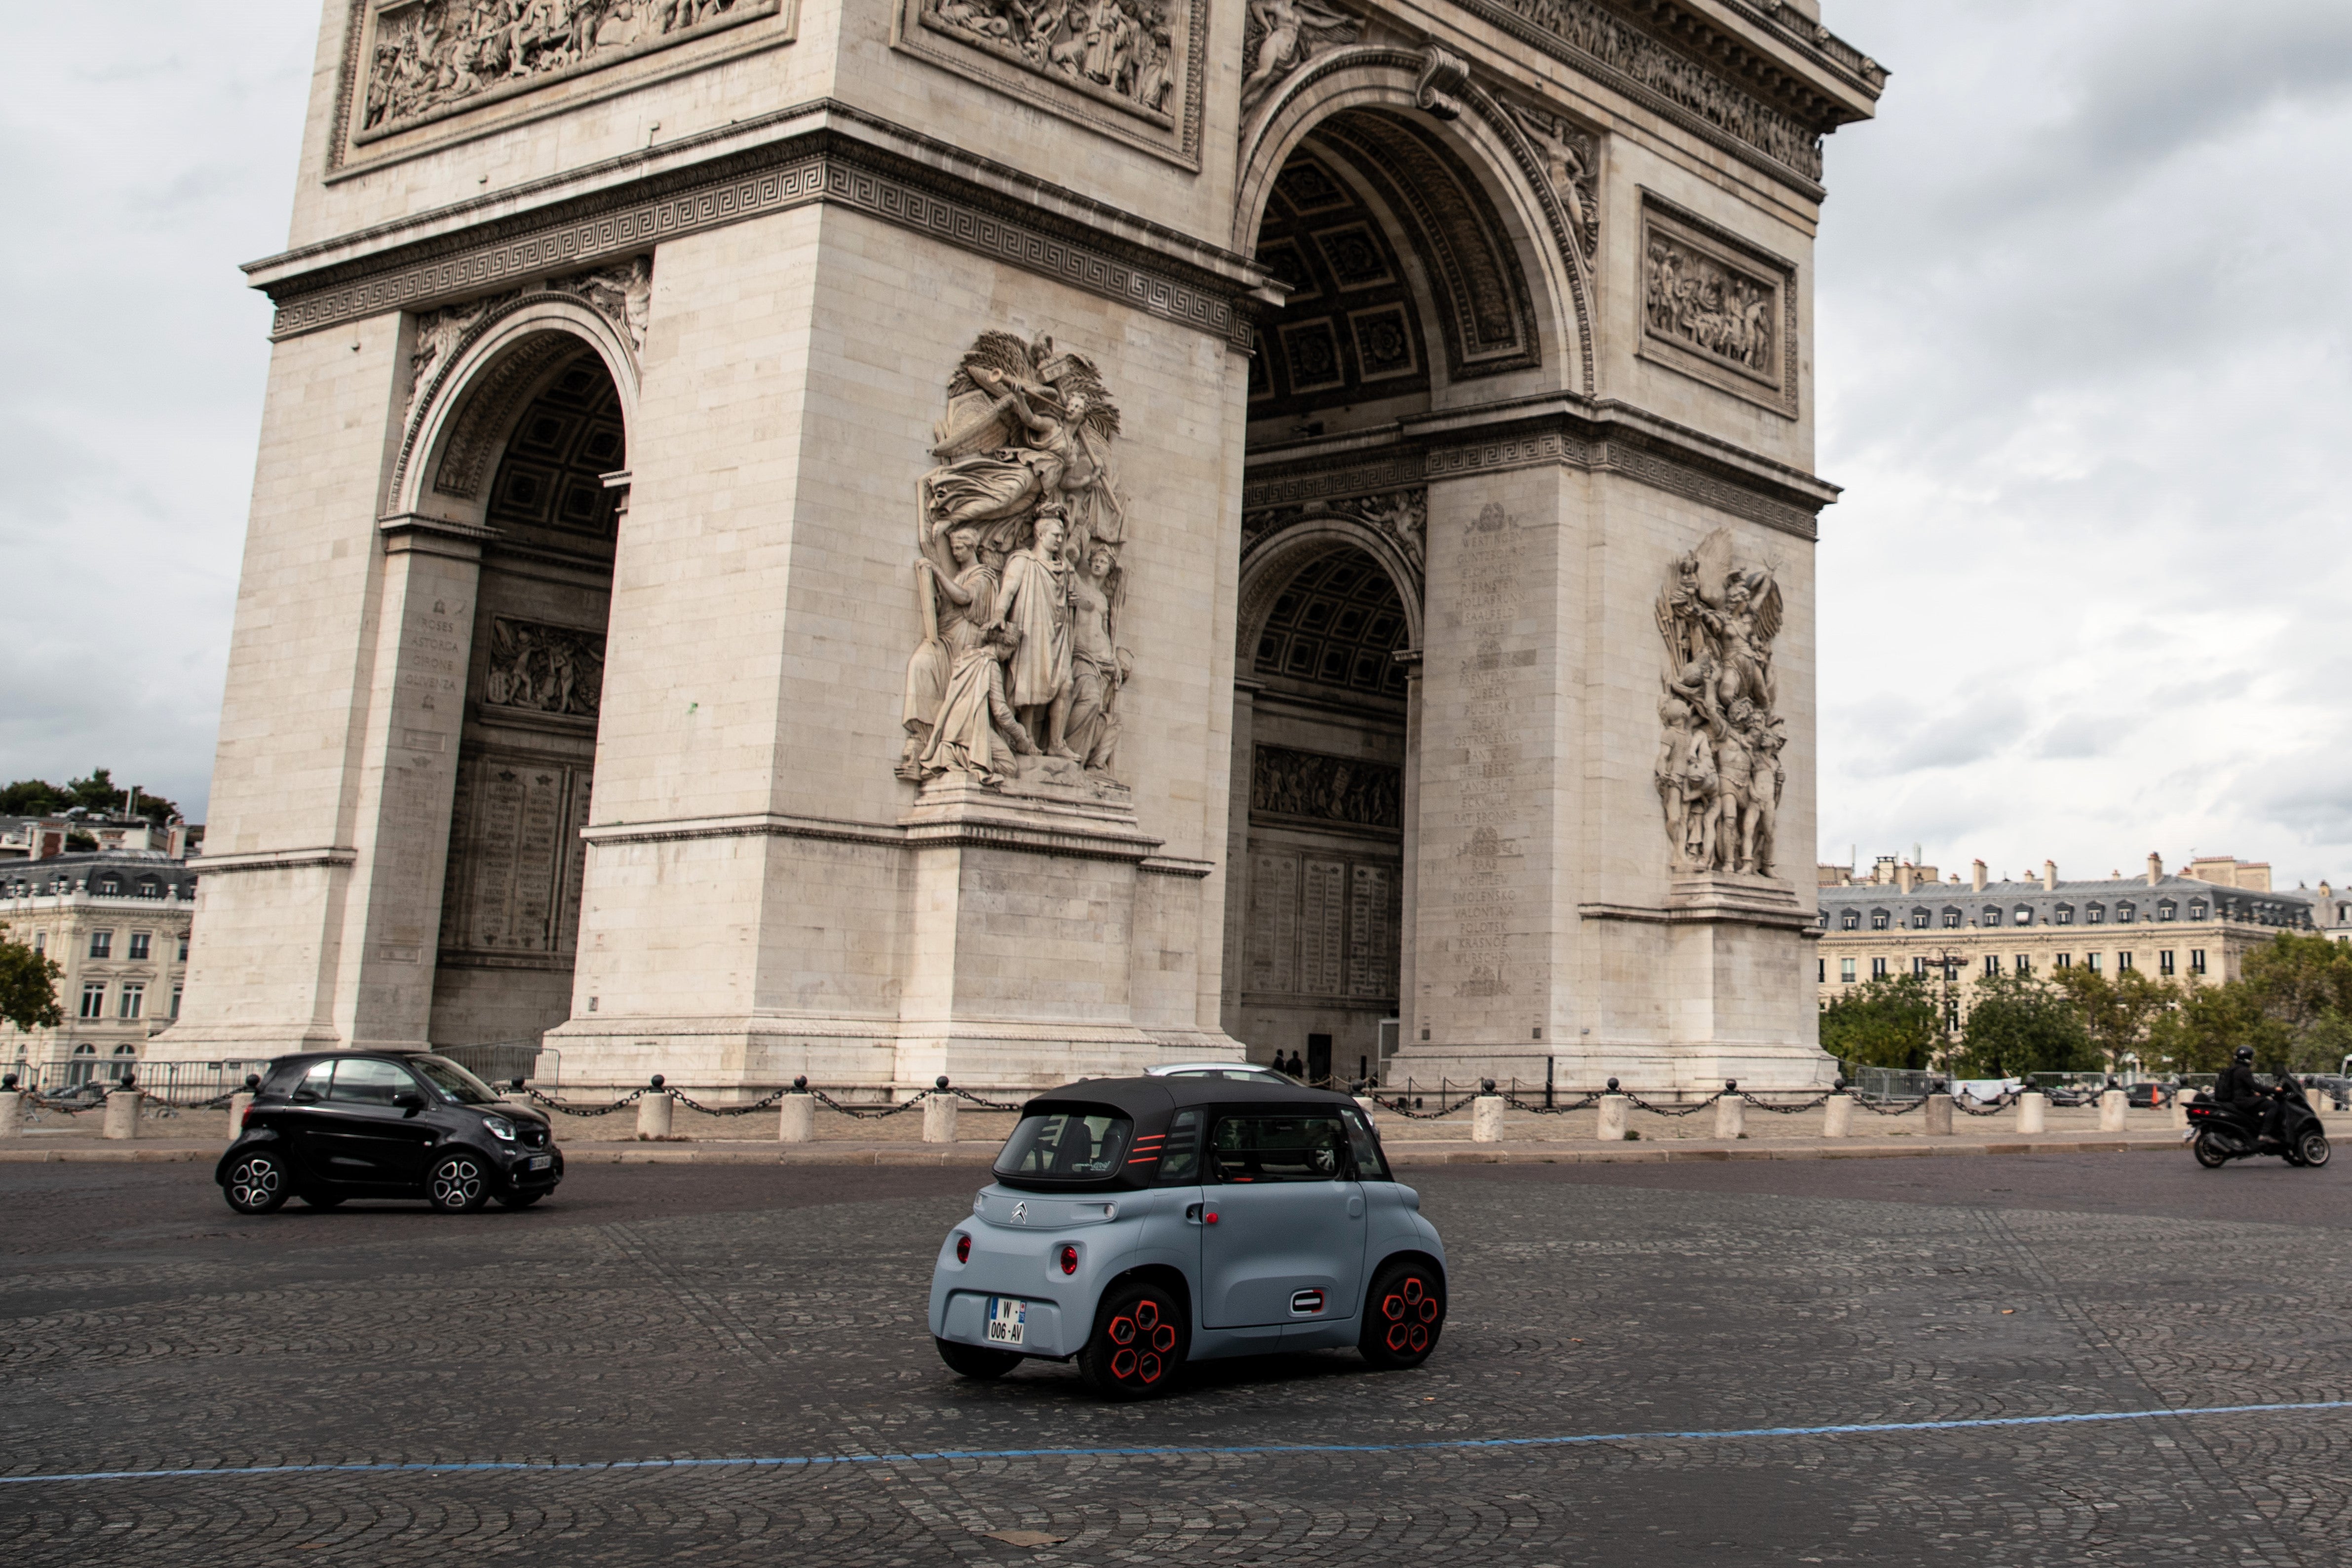 The all-electric Citroën Ami next to the Arc de Triomphe in September 2020